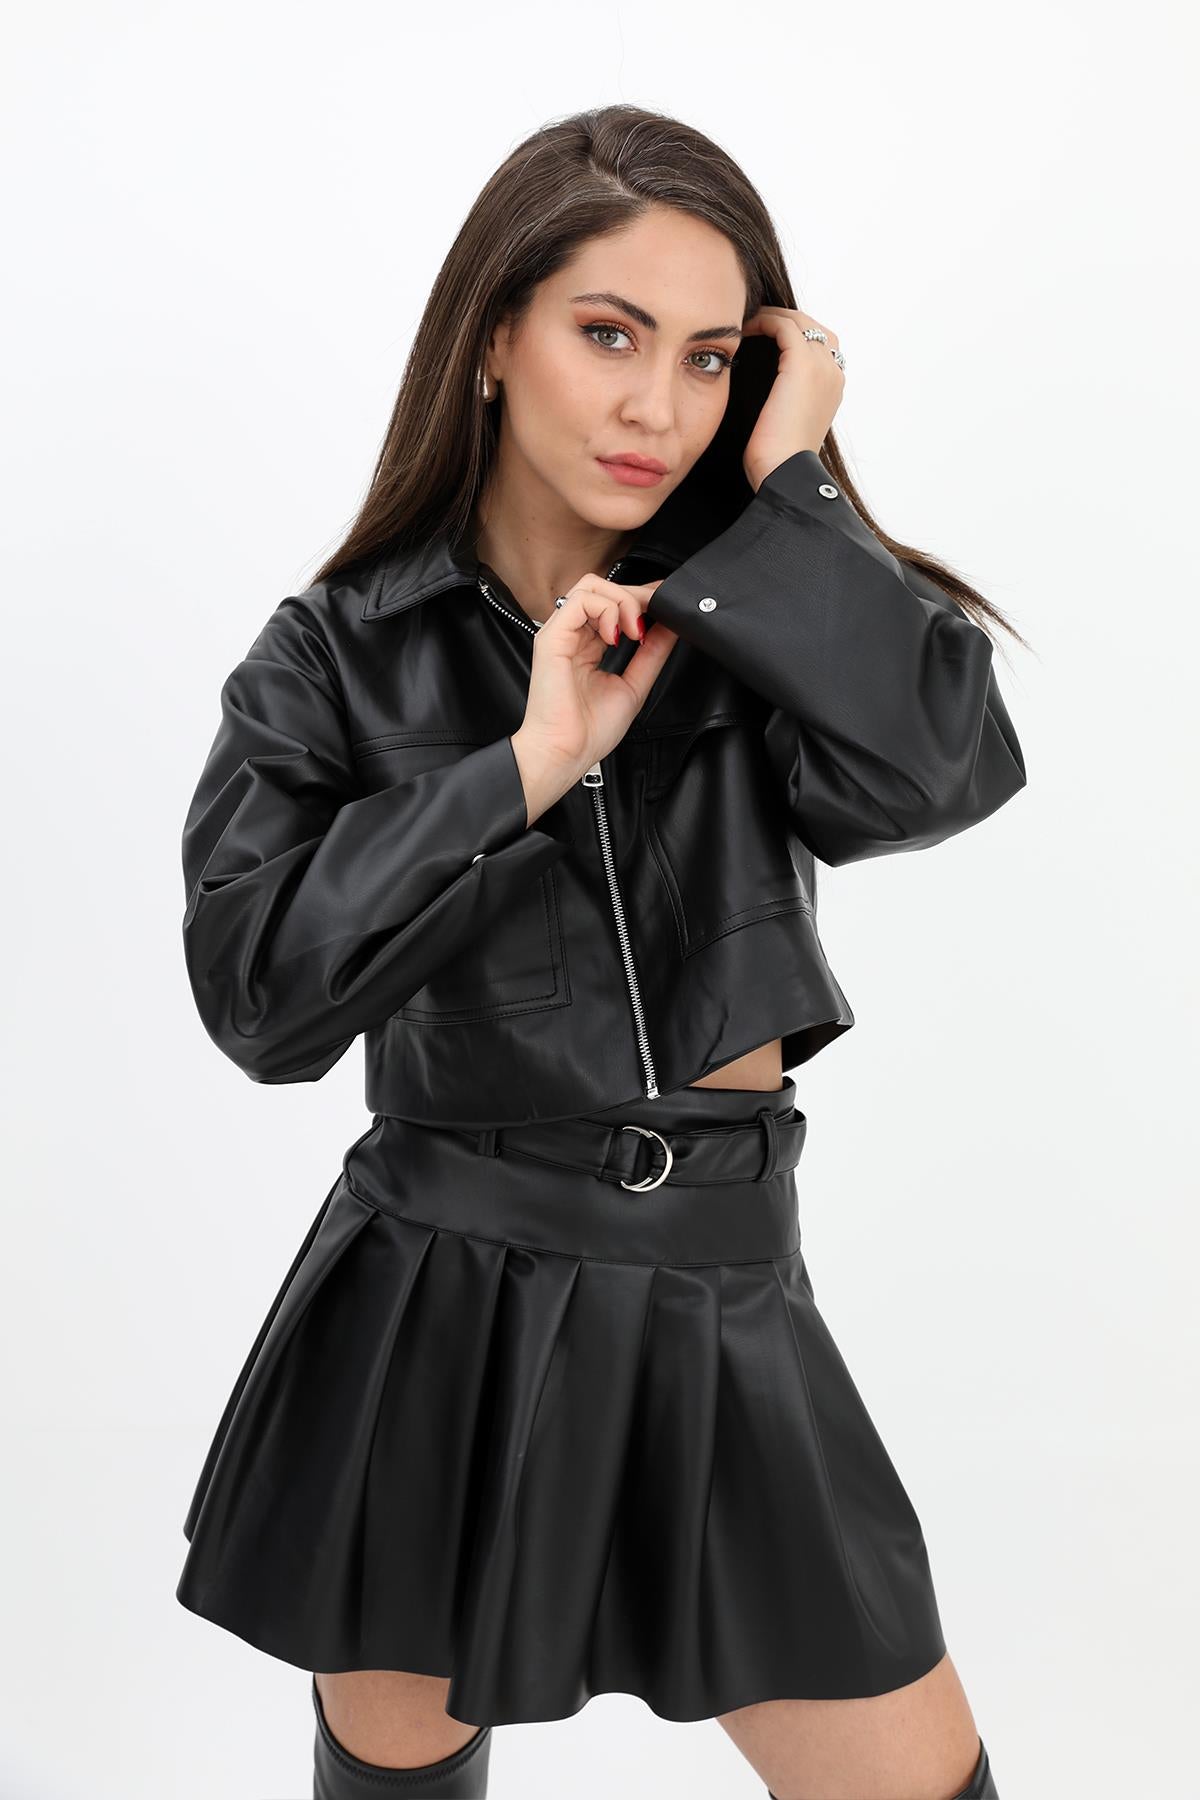 Women's Leather Jacket with Snap on Sleeves and Zipper on the Front - Black - STREETMODE ™